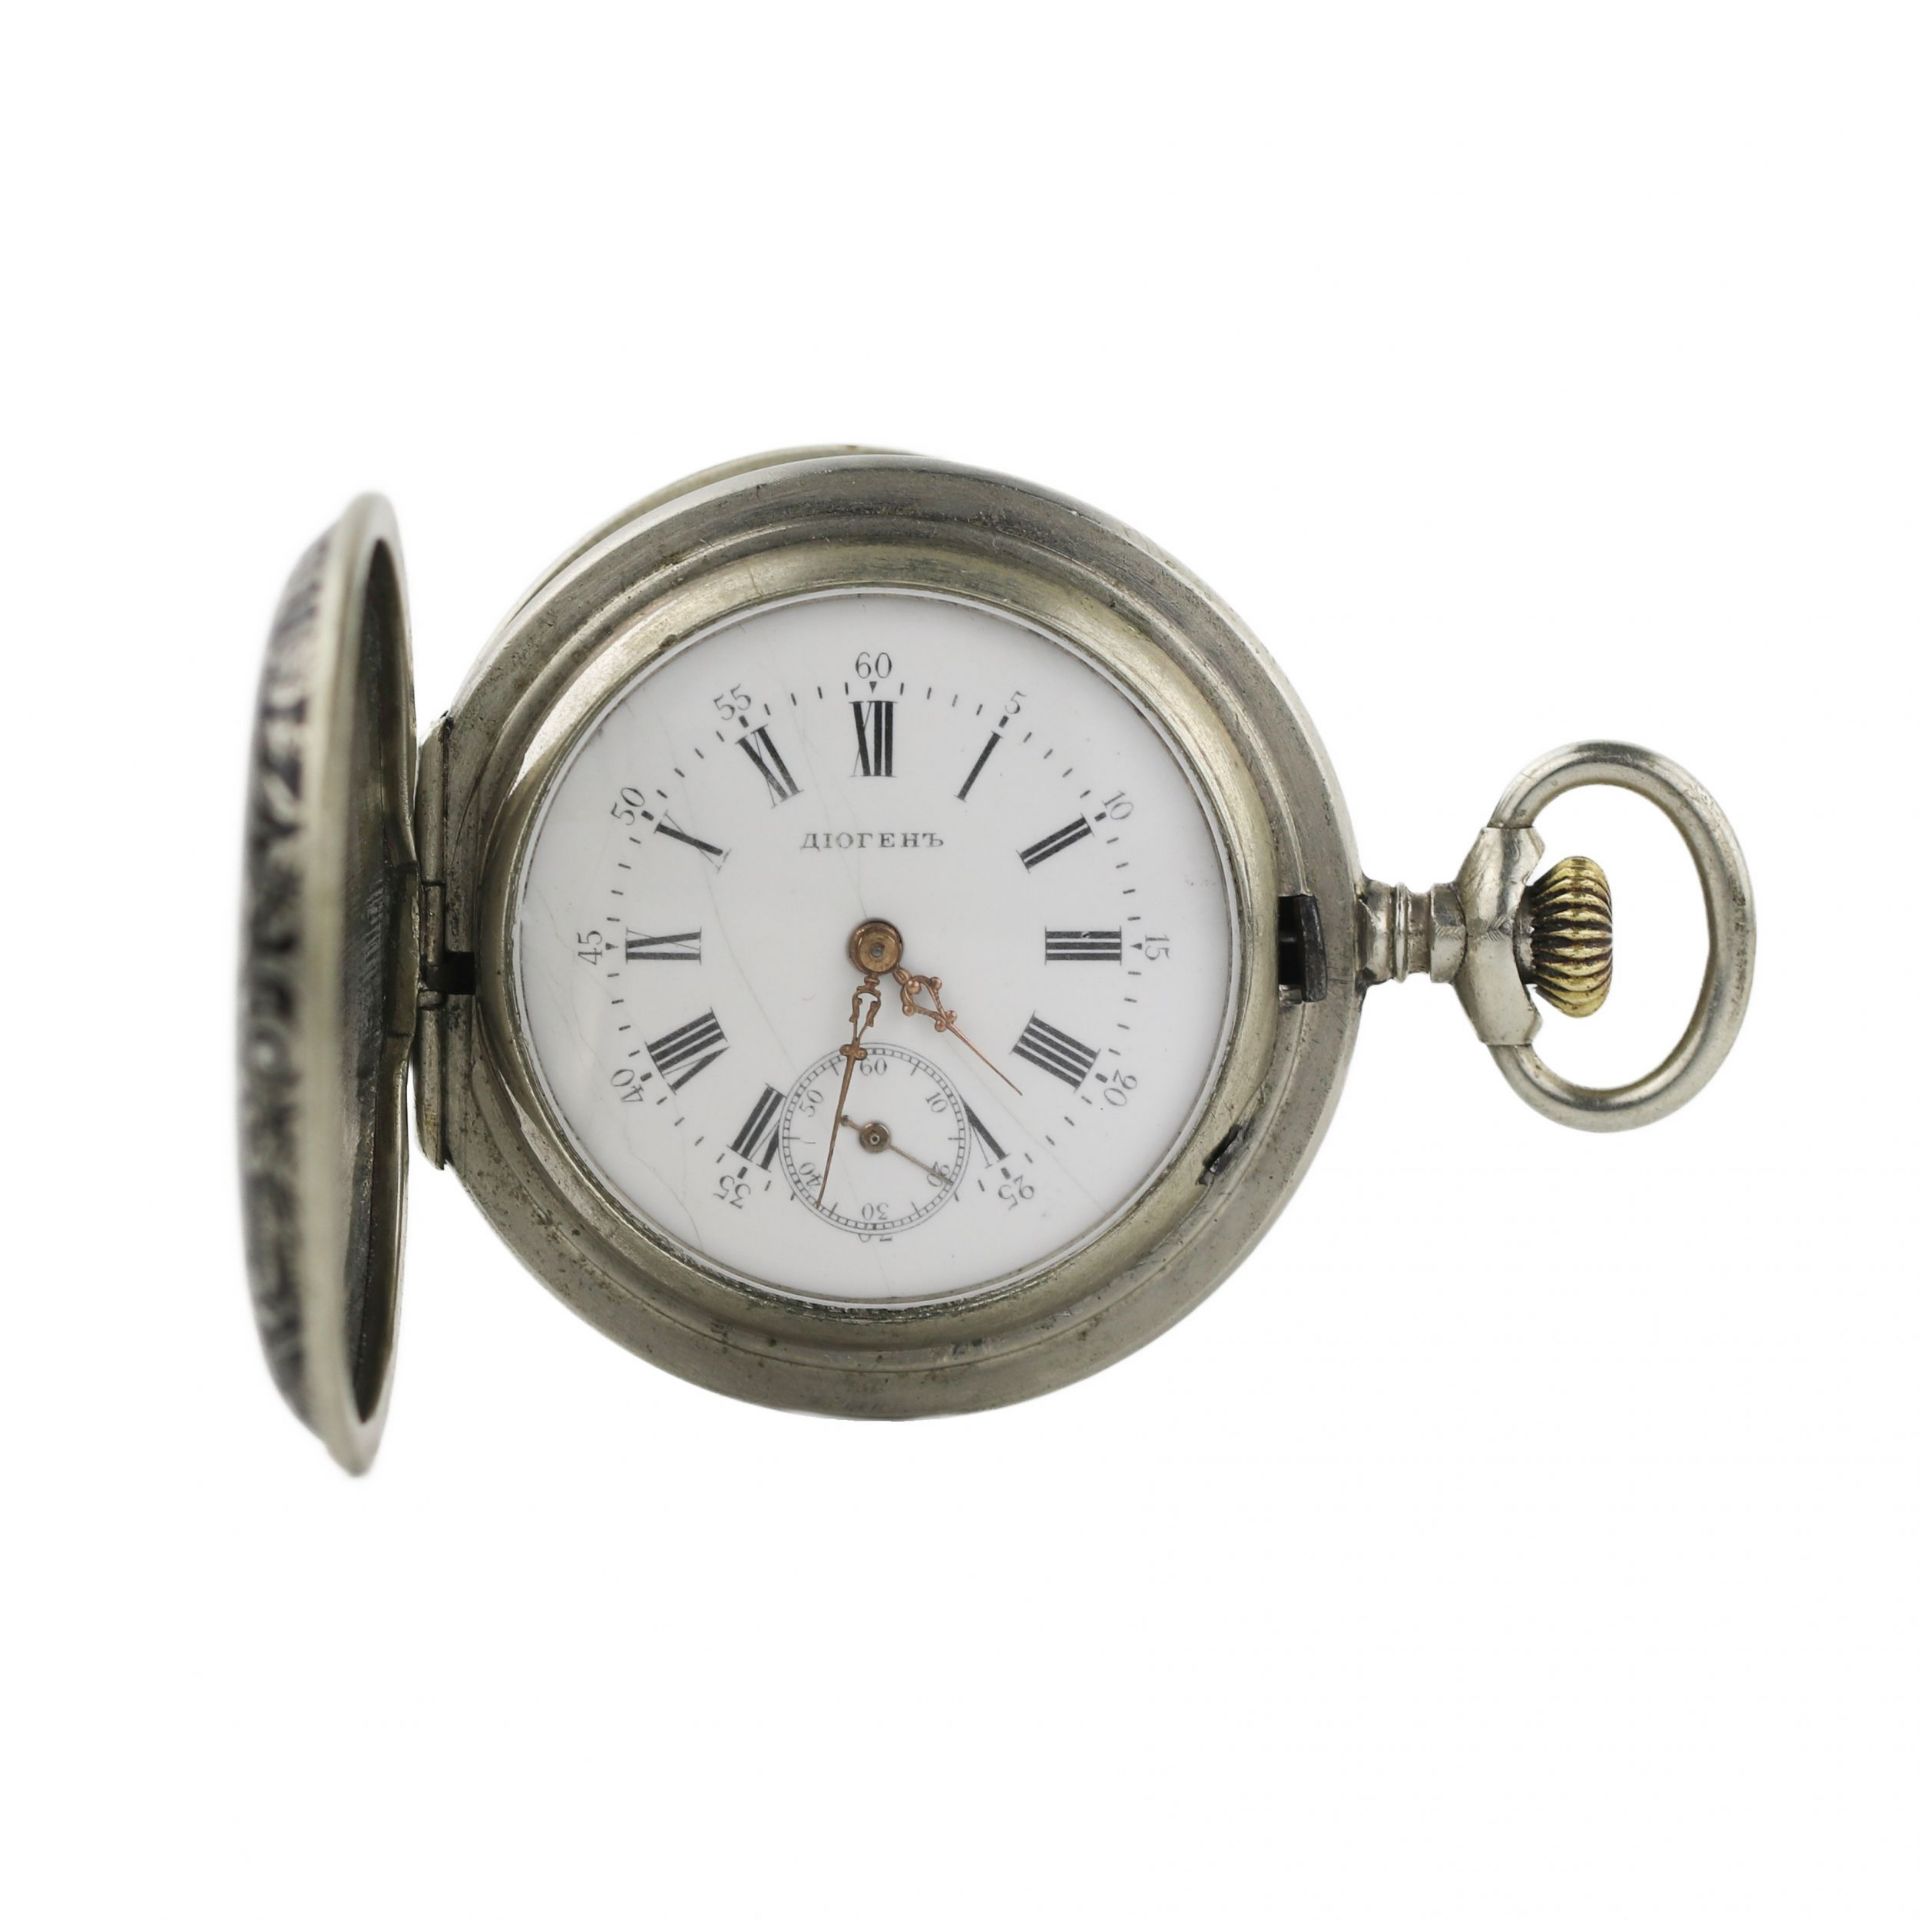 Russian pocket watch with blackened metal pattern. Diogenes company. Early 20th century. - Image 2 of 5